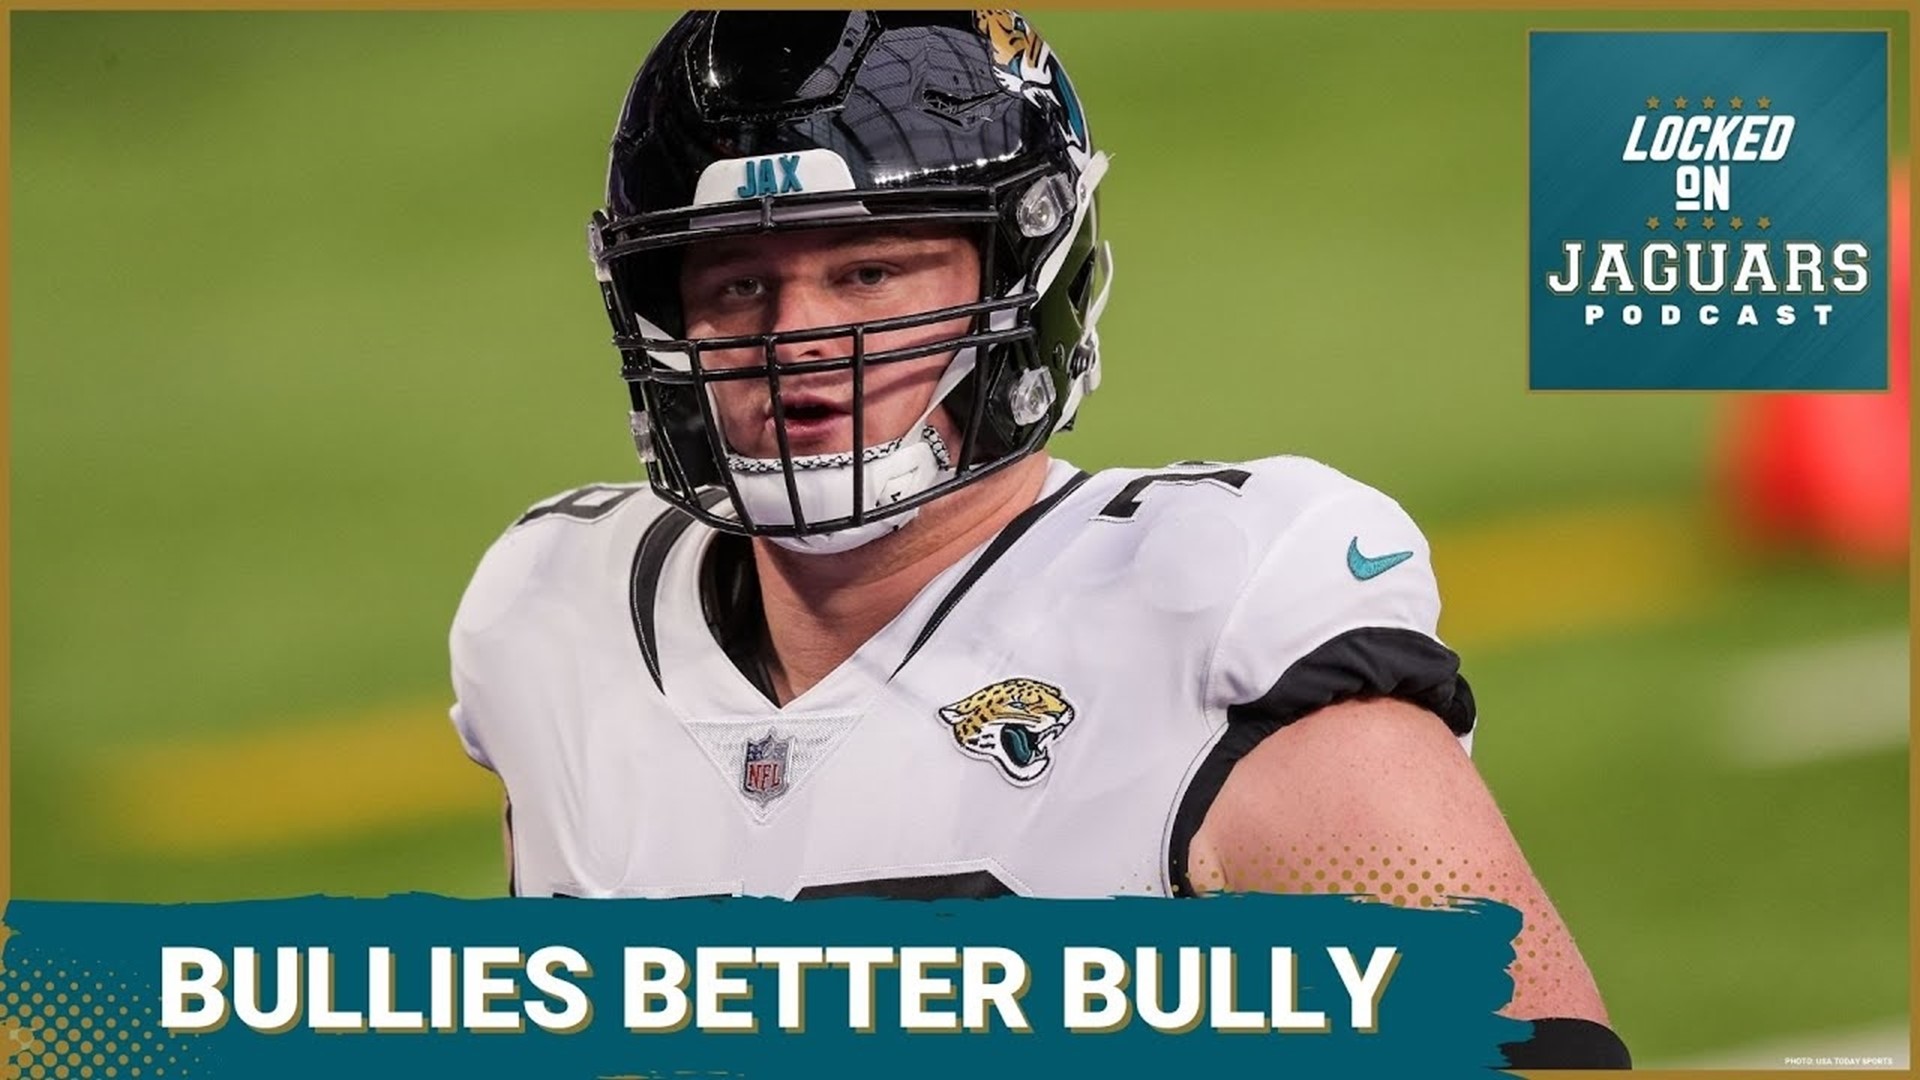 The Jacksonville Jaguars Offensive Line has been a topic of discussion for this podcast for awhile now. Good or bad, agree or disagree, this is an ongoing discussion